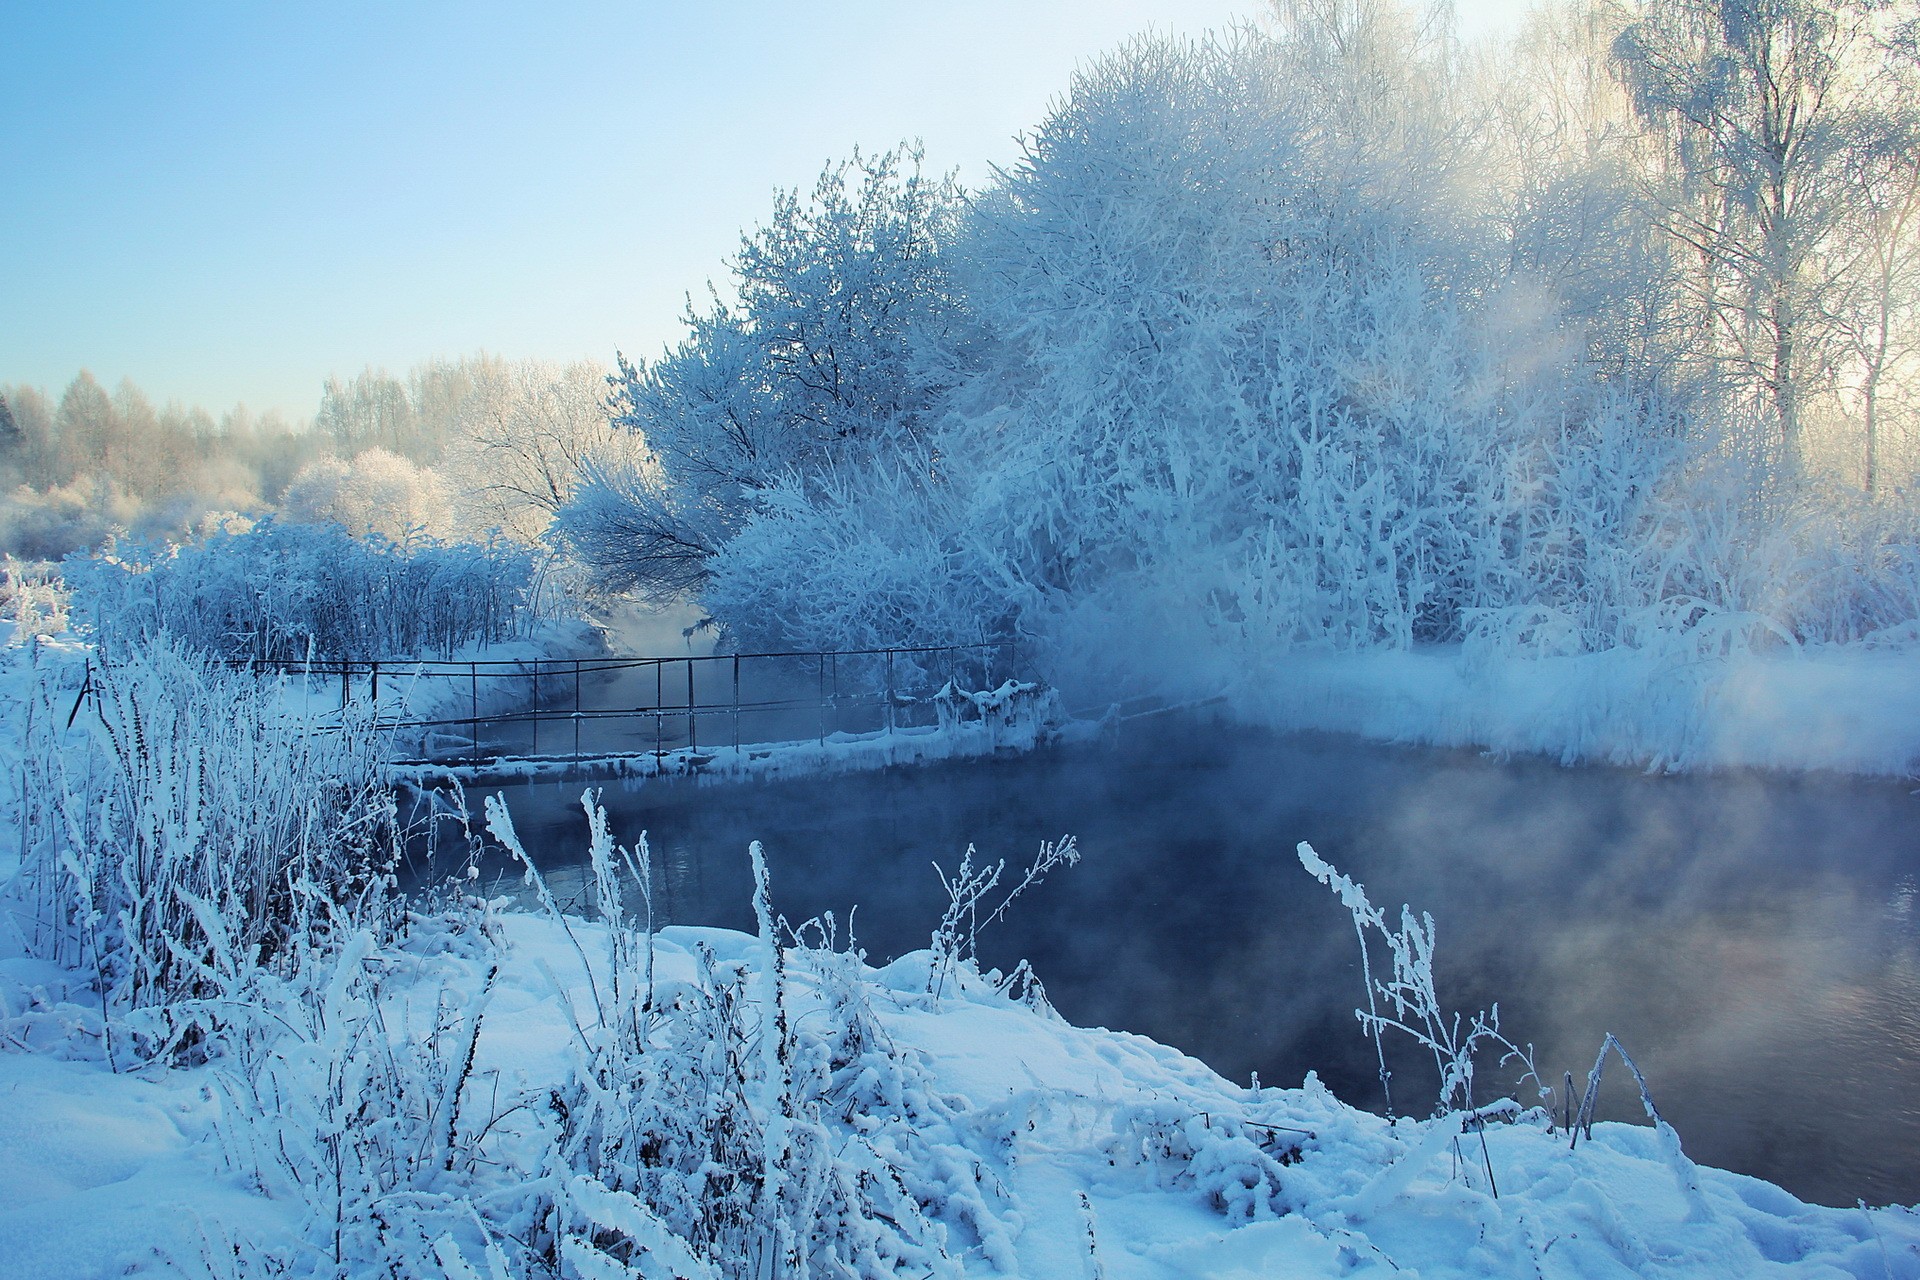 General 1920x1280 winter ice snow landscape nature cold outdoors bridge frost